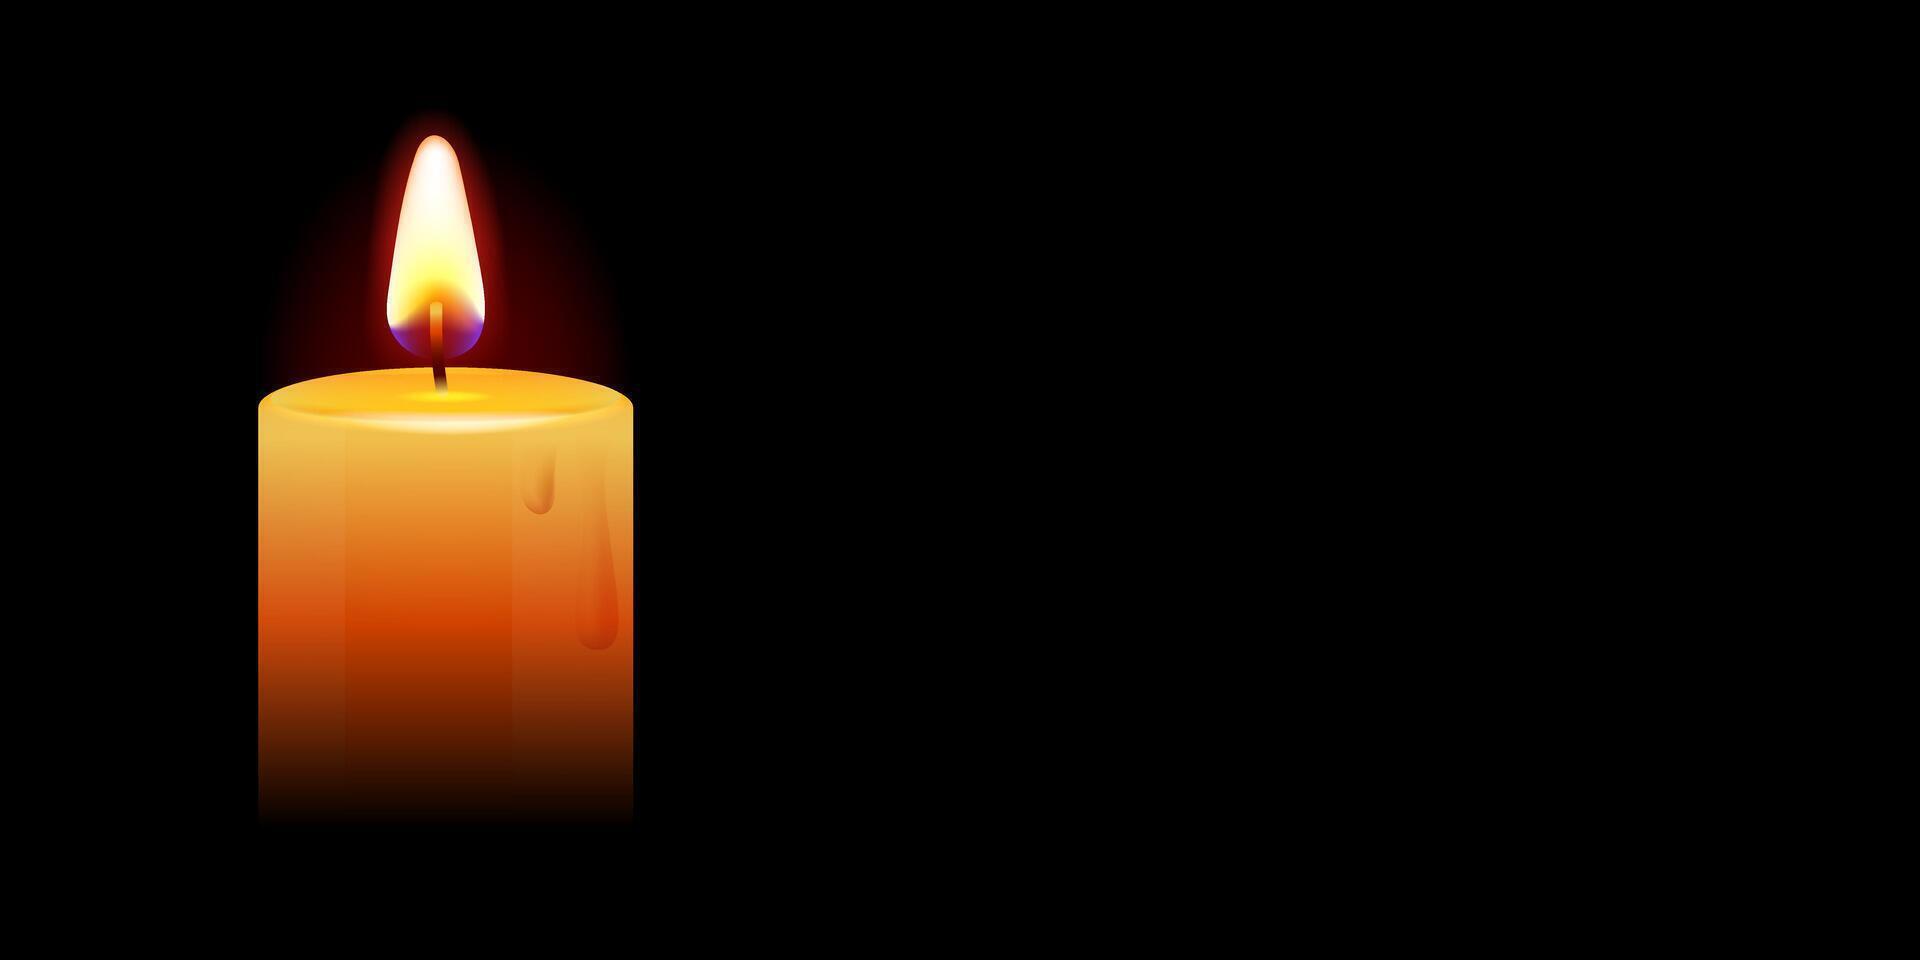 Candle burning in the dark. Yellow candle on black background. Funeral, memorial candle with melted wax. Banner for condolence obituary message. Mourning. Candle flame at night. Remembrance day. vector